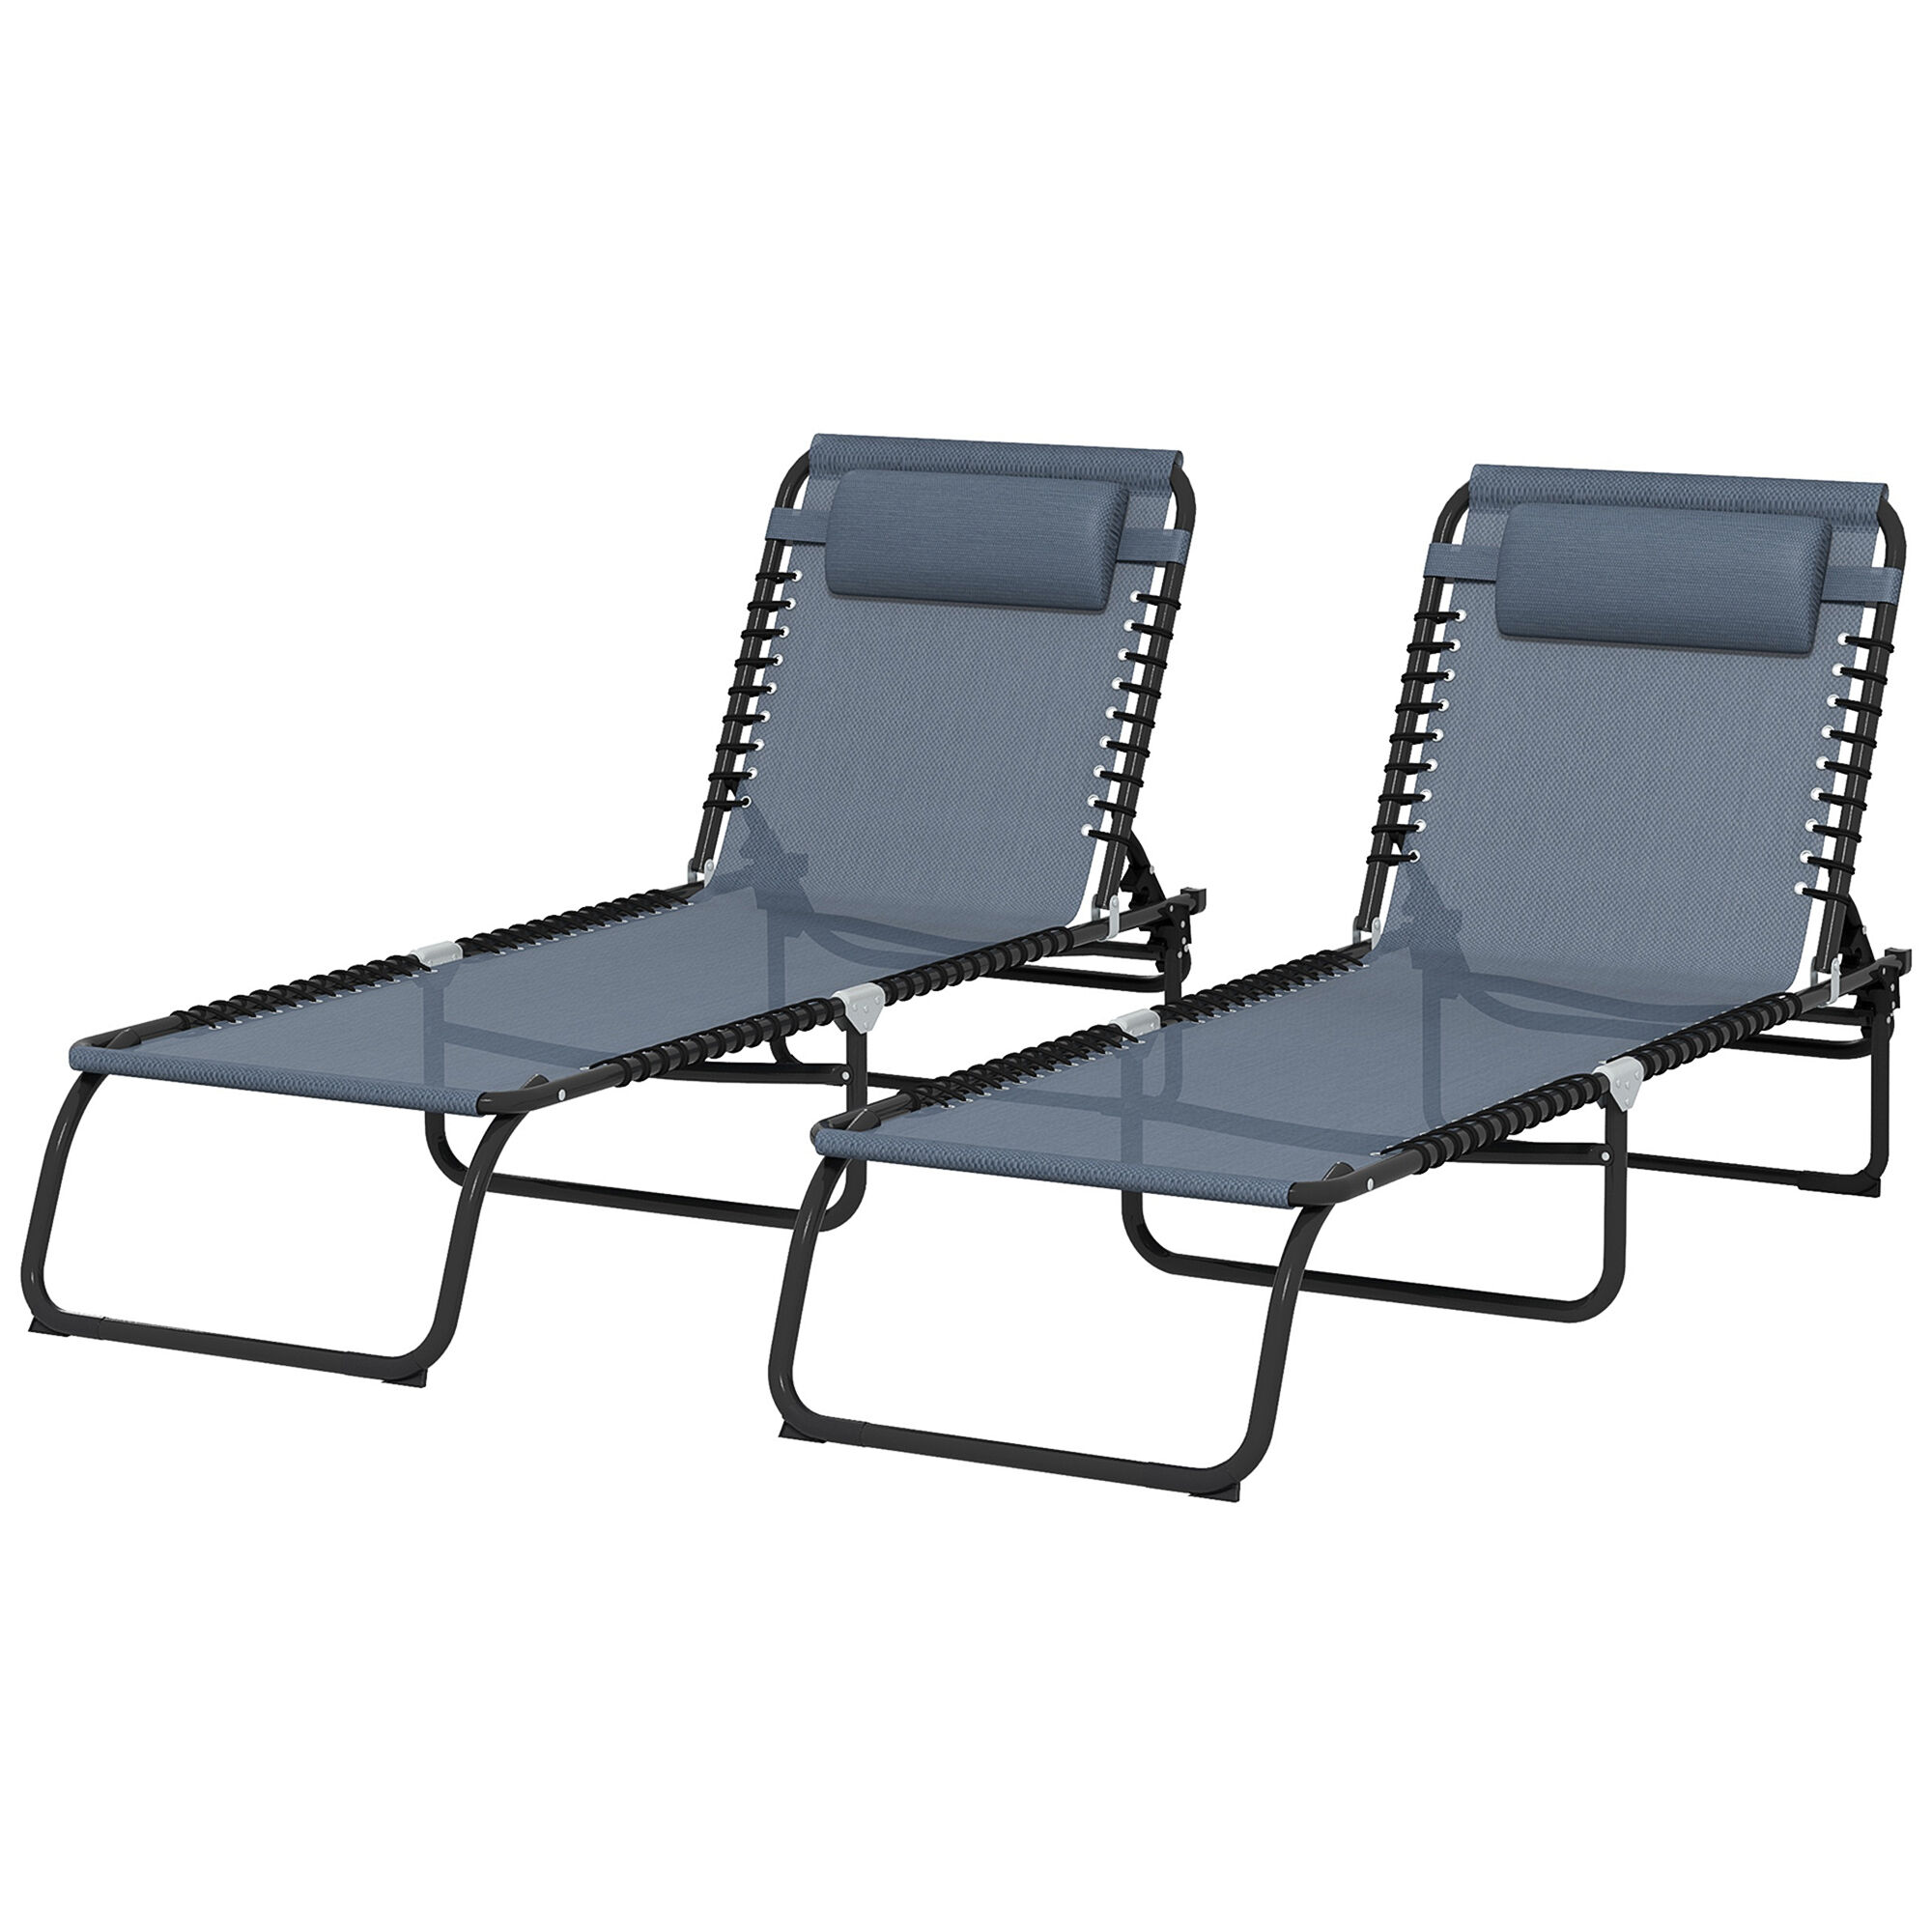 Outsunny 2-Pack Reclining Beach Chairs 4-Position Folding Chaise Lounge Gray for Sun Lounging   Aosom.com